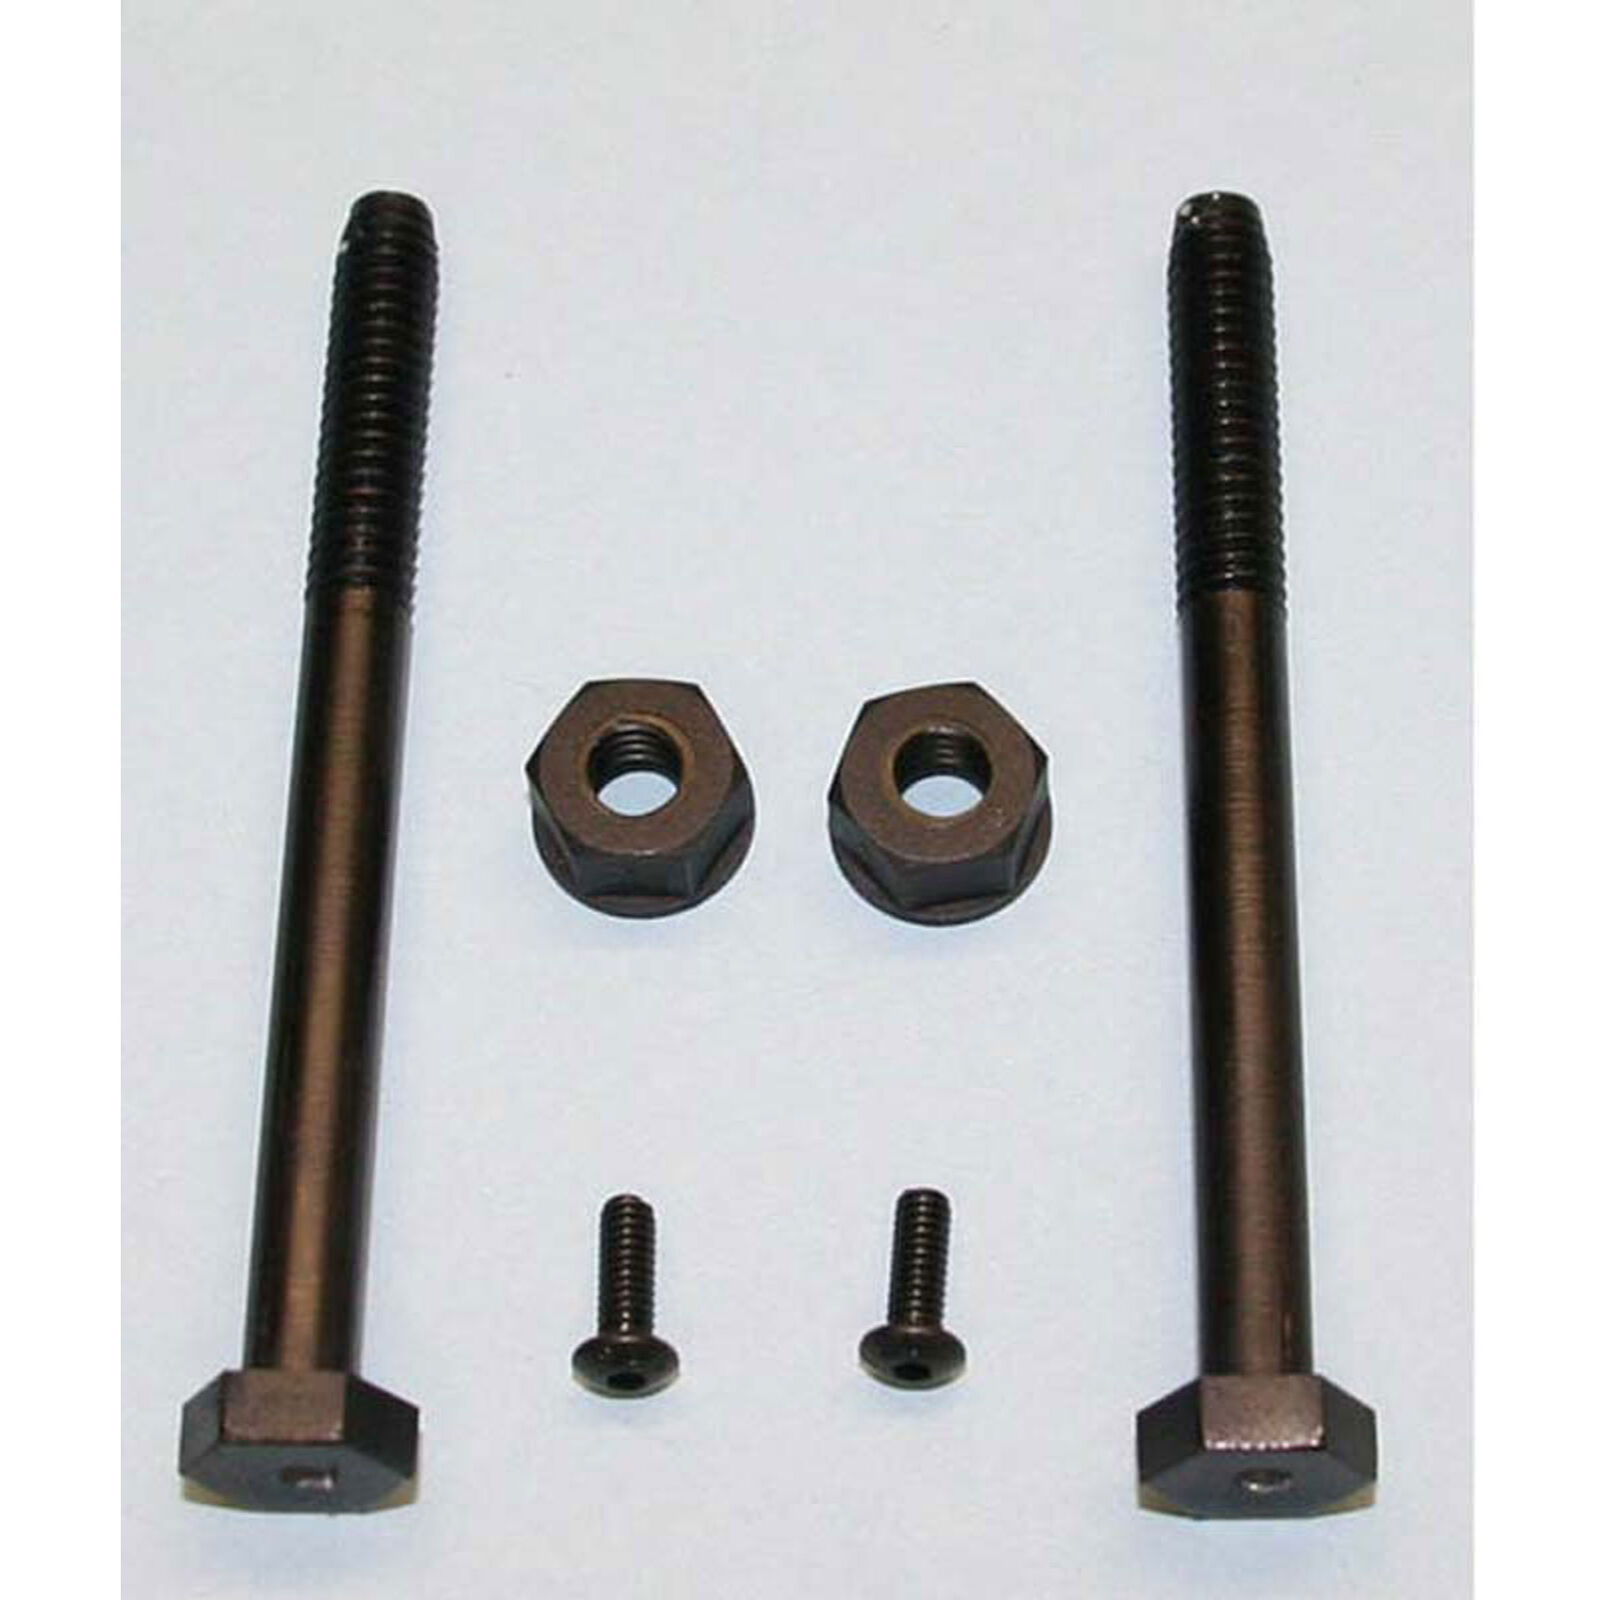 Threaded Body Post, 3" with Hardware (2)